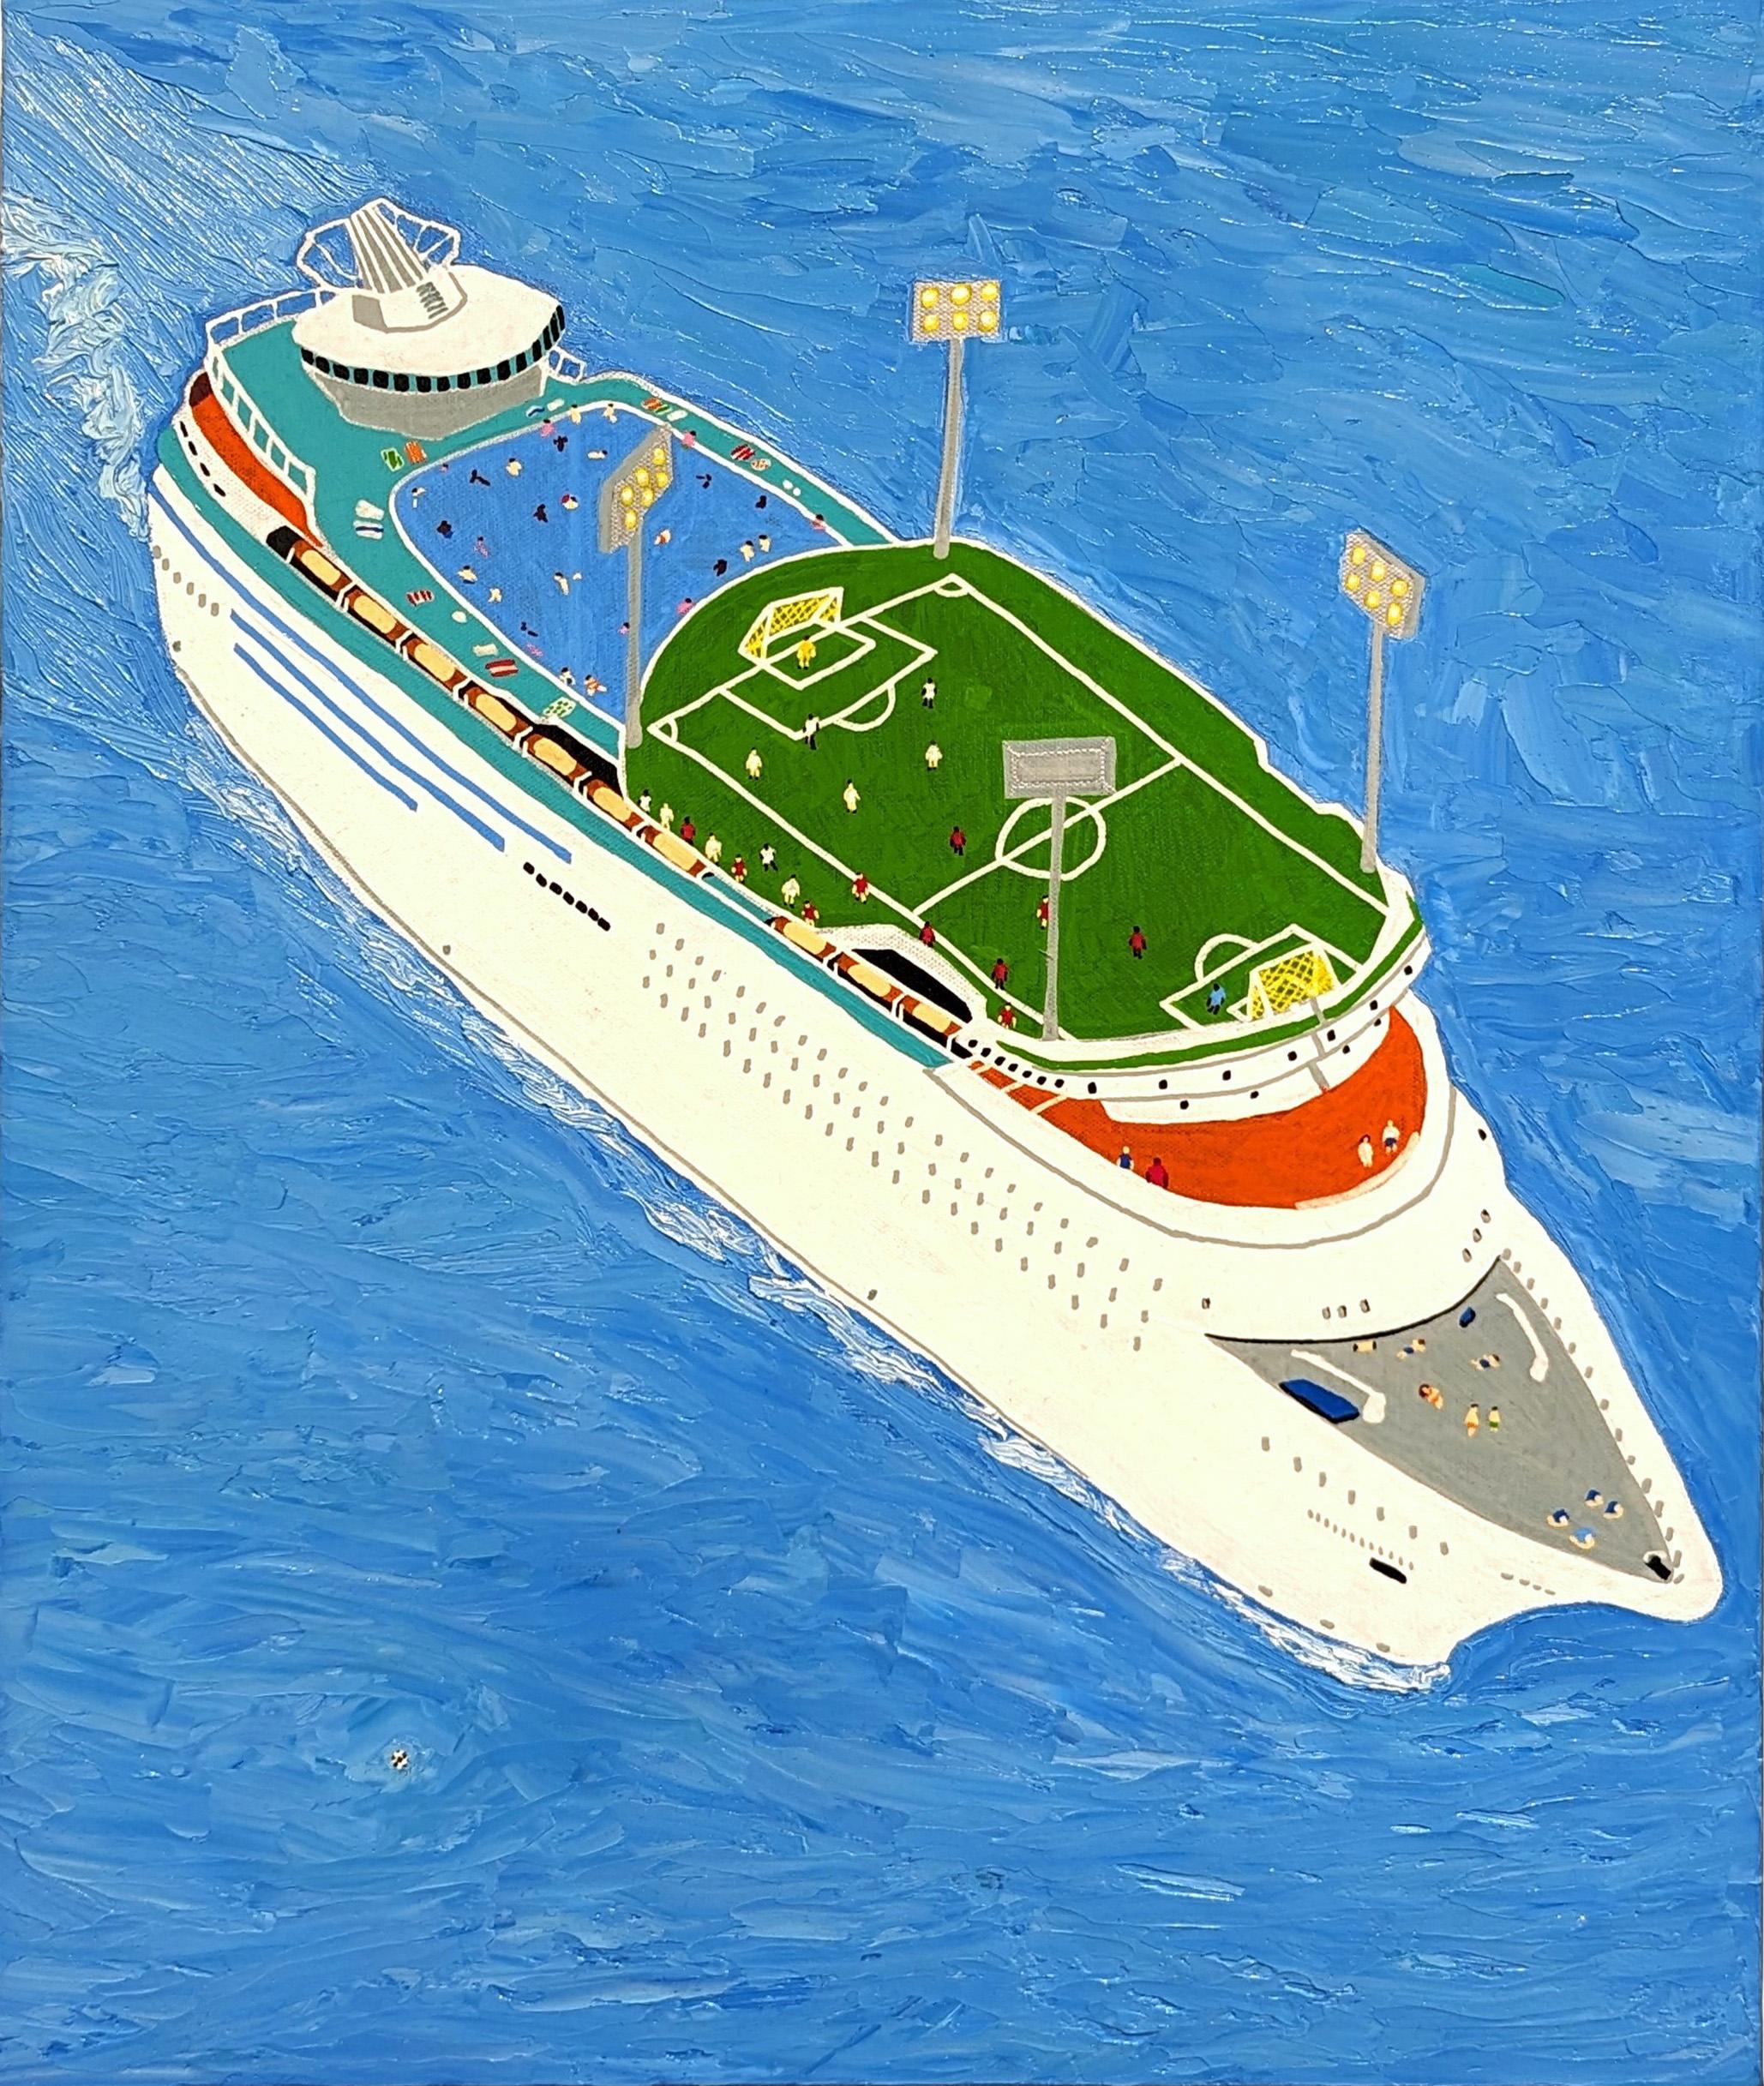 Das ist wohl das Spiel The Colorful Contemporary Humorous Ship Landscape Painting